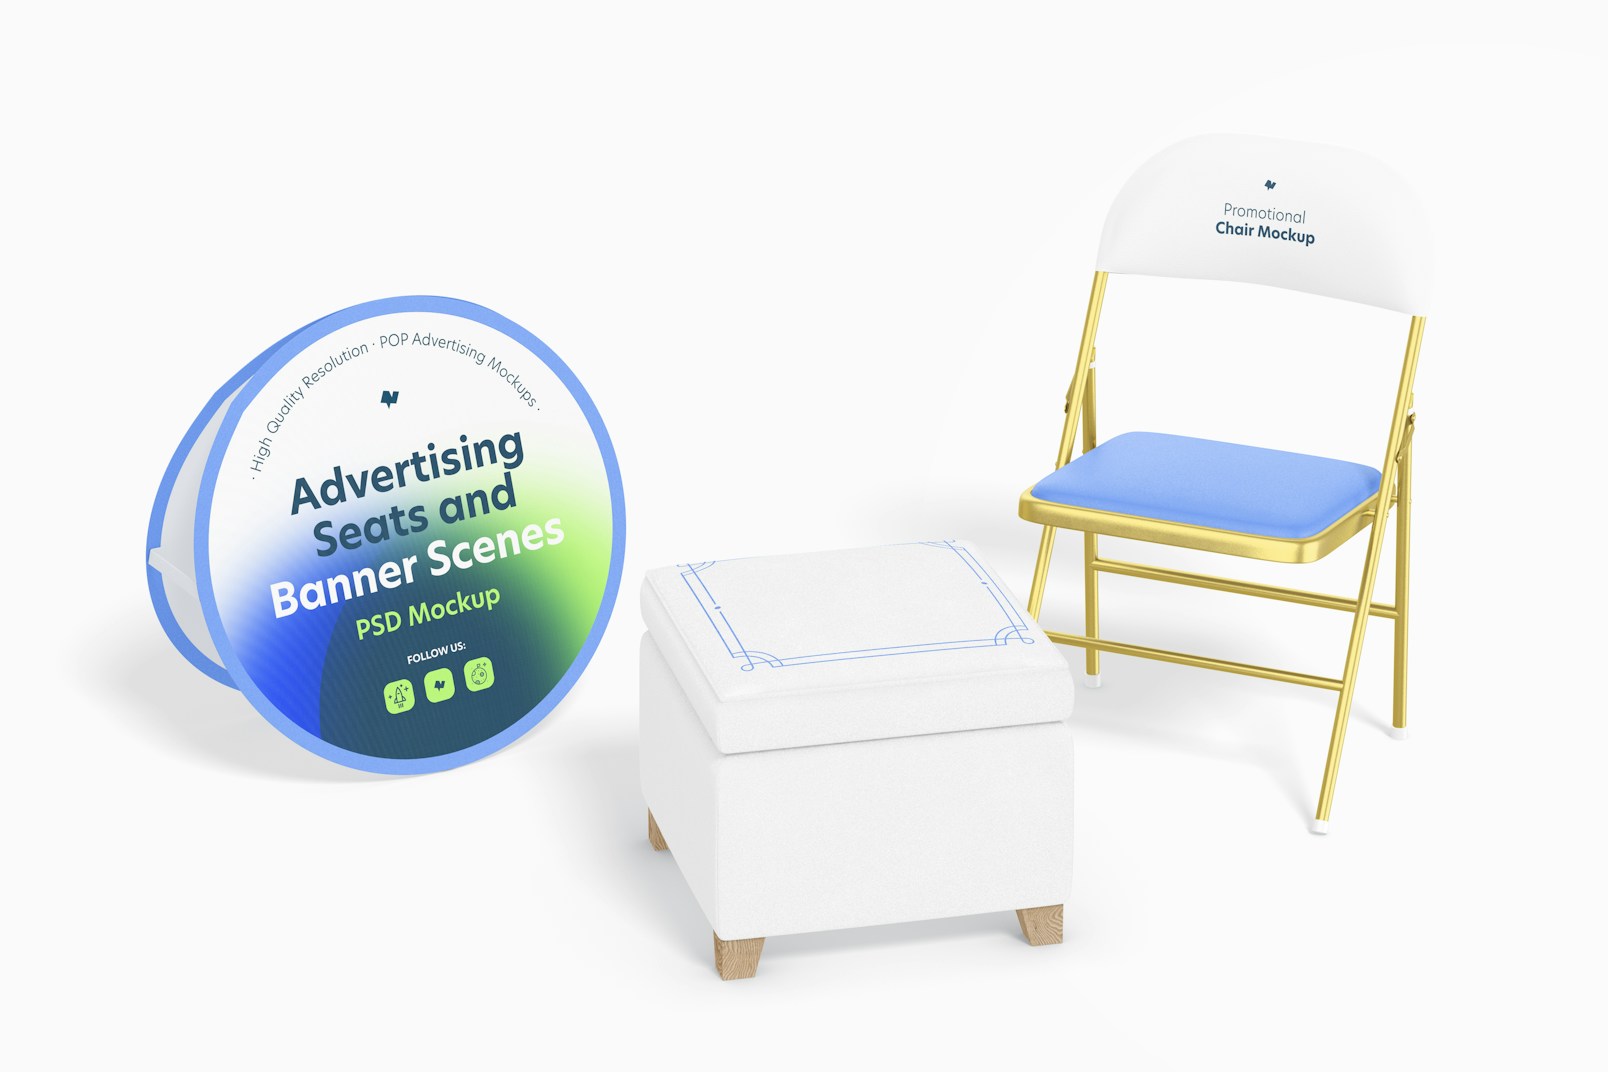 Advertising Seats and Banner Scenes Mockup, Perspective 02